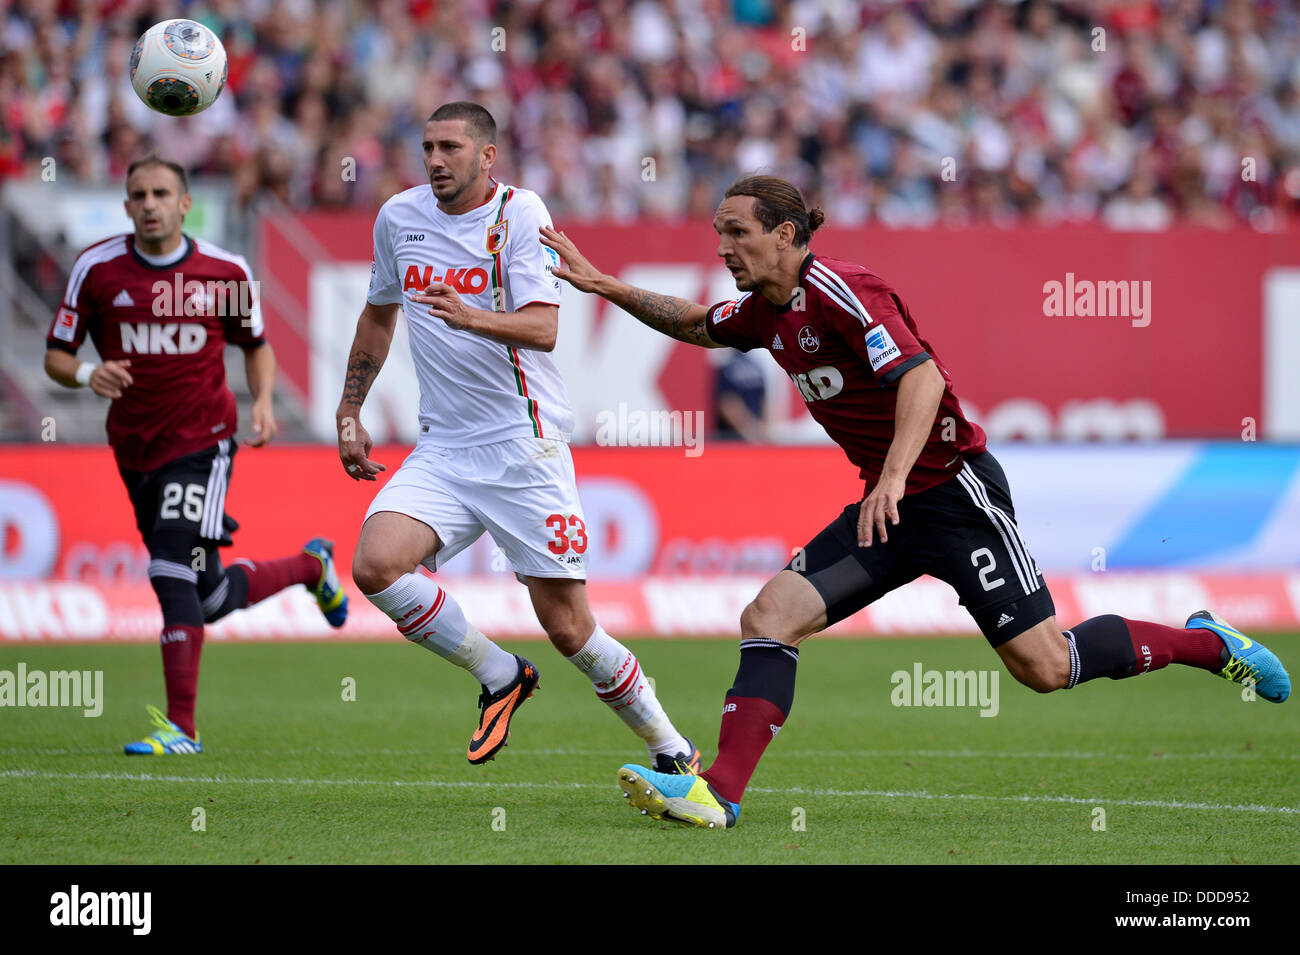 Nuremberg, Germany. 31st Aug, 2013. Nuremberg's Emanuel Pogatetz (R) vies for the ball with Augsburg's Sascha Moelders during the Bundesliga soccer match between 1. FC Nuremberg and FC Augsburg at Grundig Stadium in Nuremberg, Germany, 31 August 2013. Photo: DAVID EBENER (PLEASE NOTE: Due to the accreditation guidelines, the DFL only permits the publication and utilisation of up to 15 pictures per match on the internet and in online media during the match.)/dpa/Alamy Live News Stock Photo